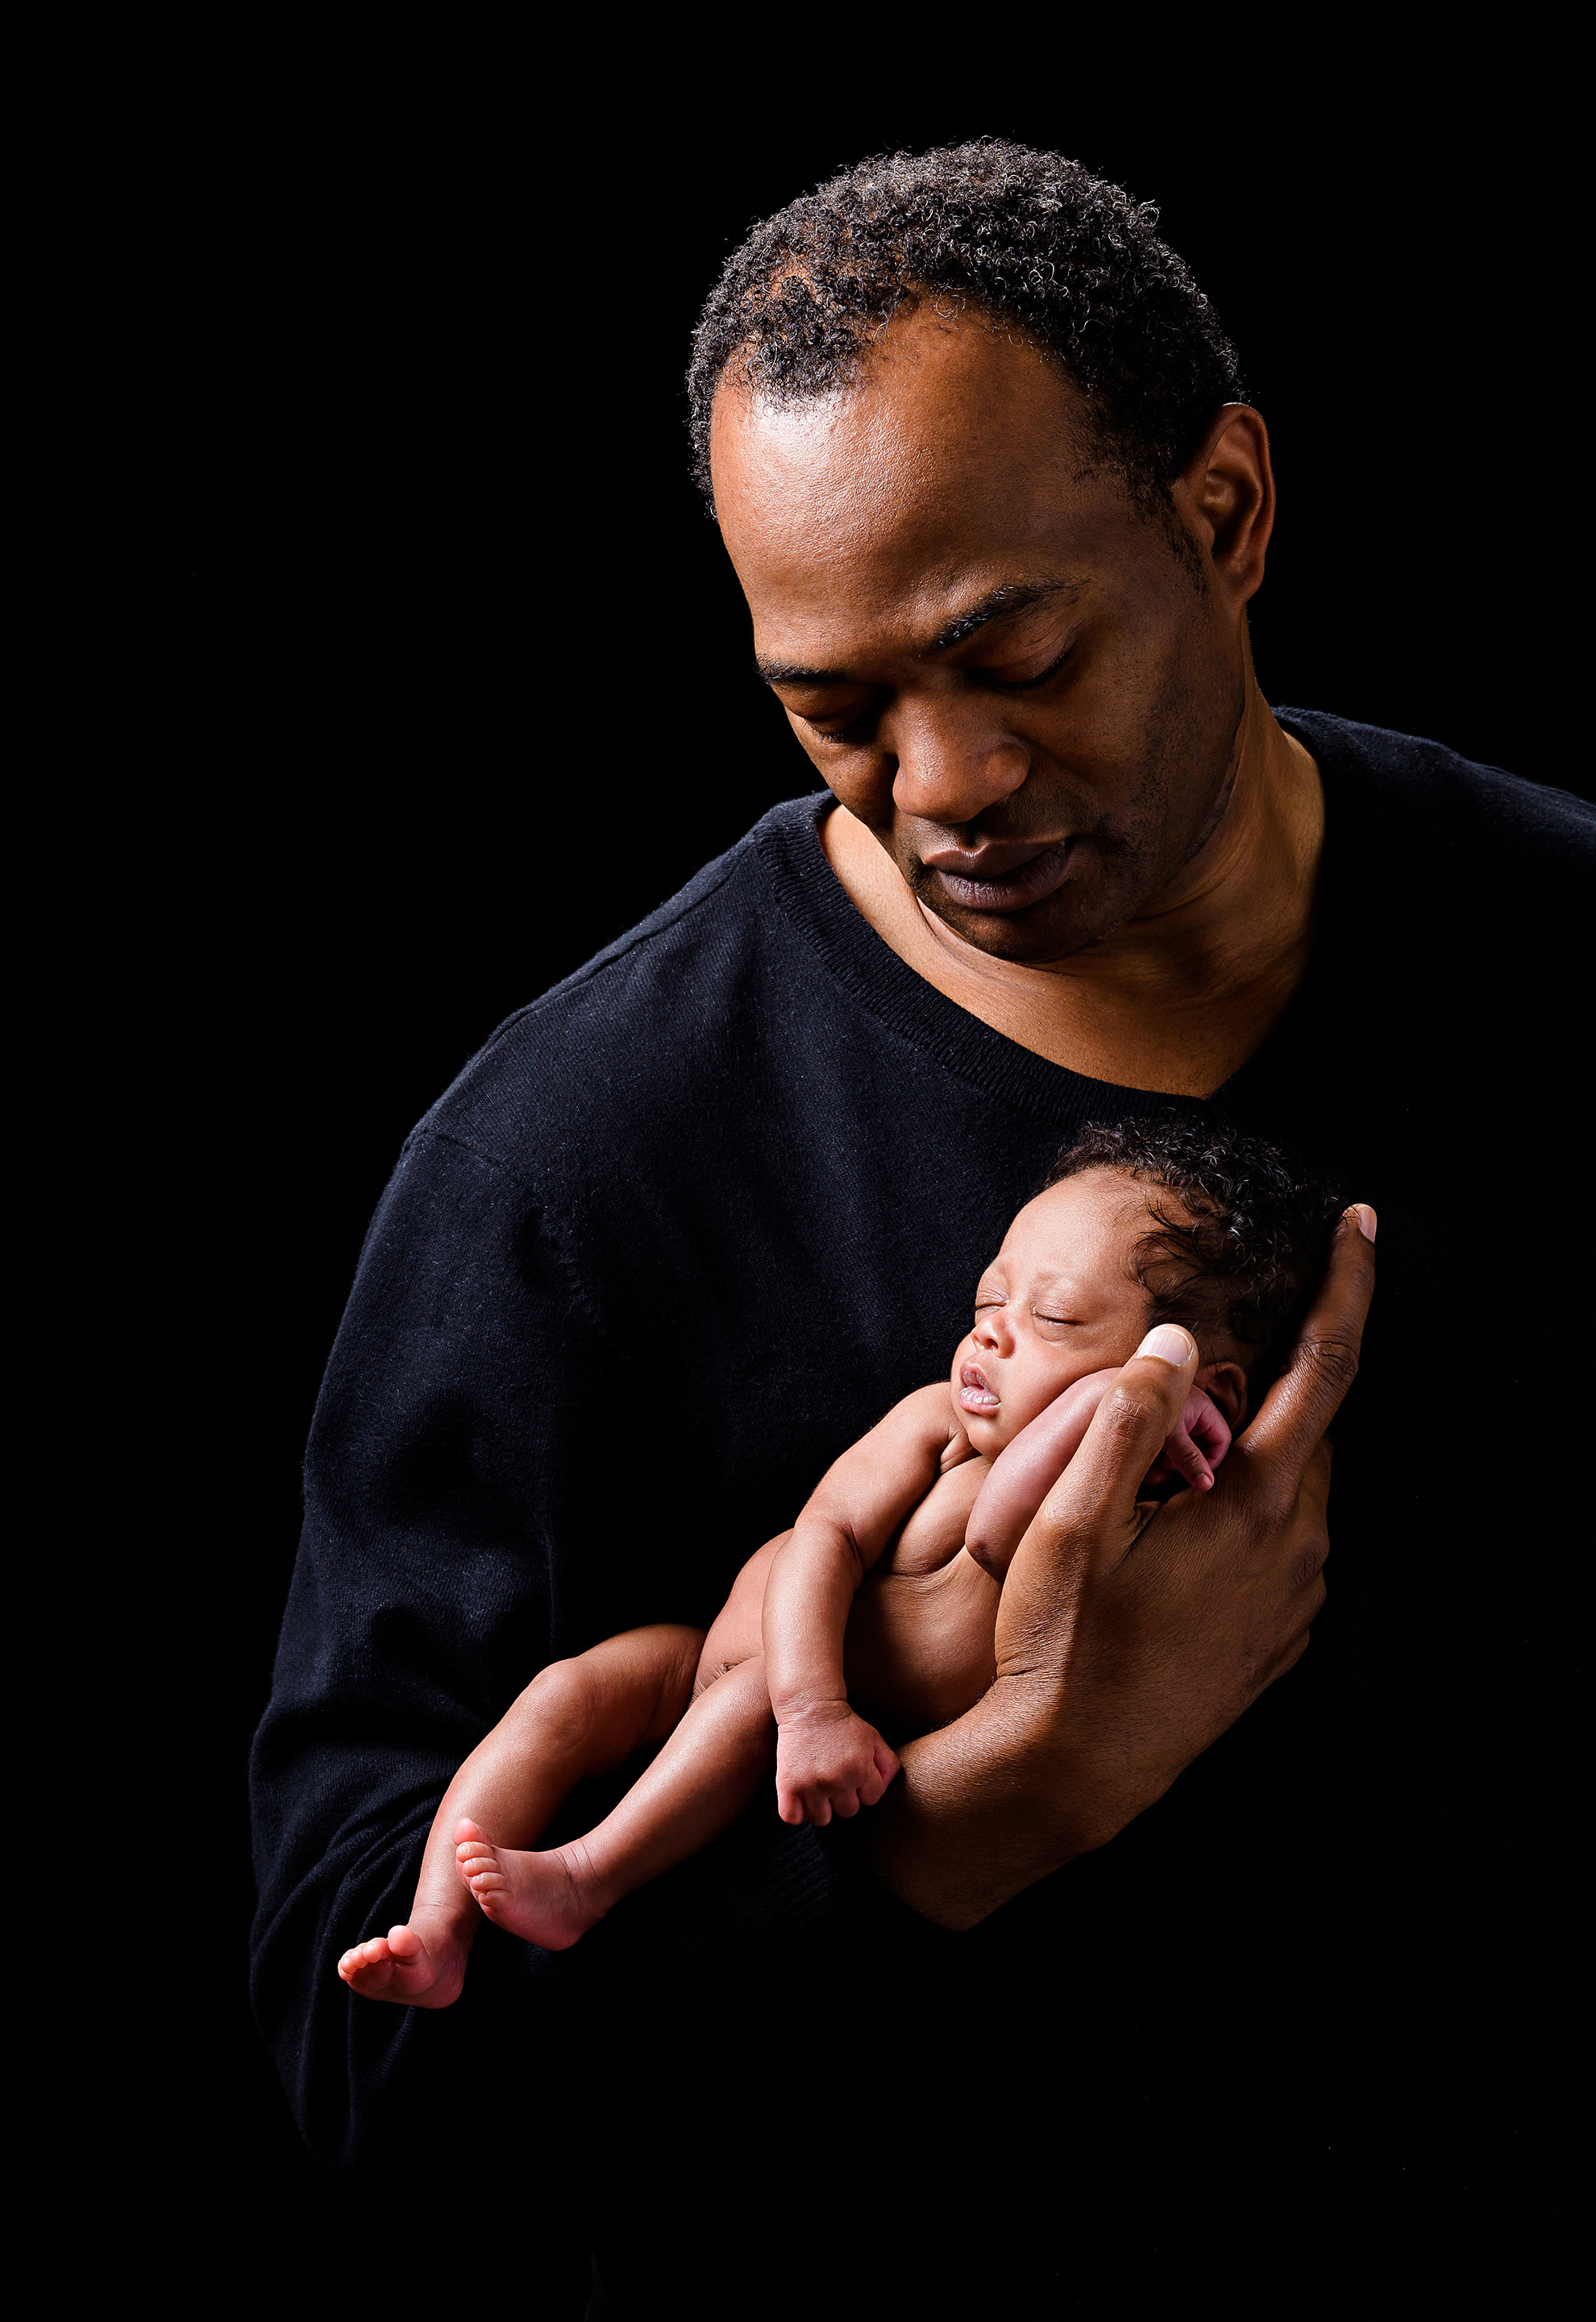 Beautiful portrait with dad and his newborn